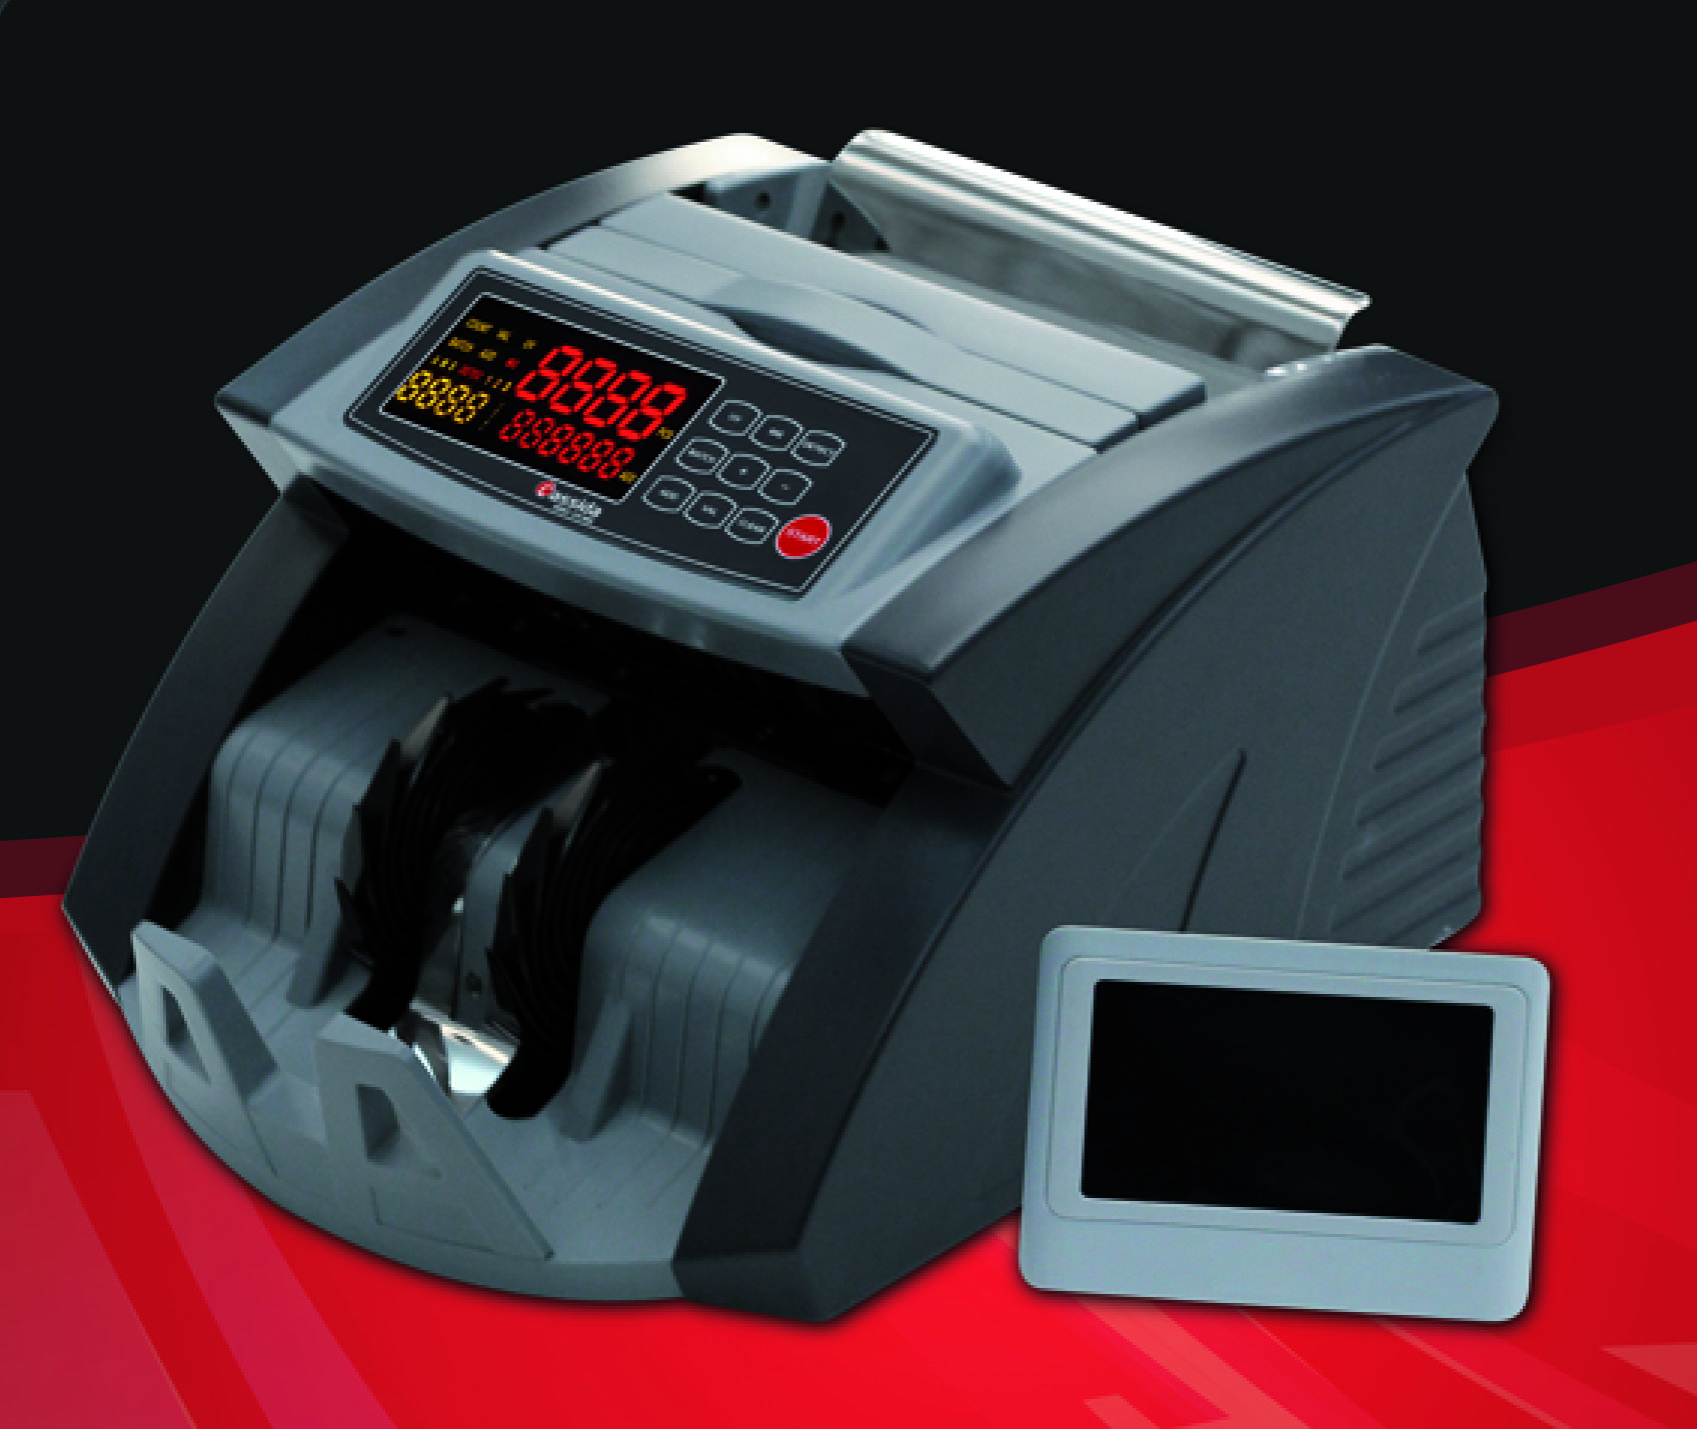 Currency Counting Machines Dubai